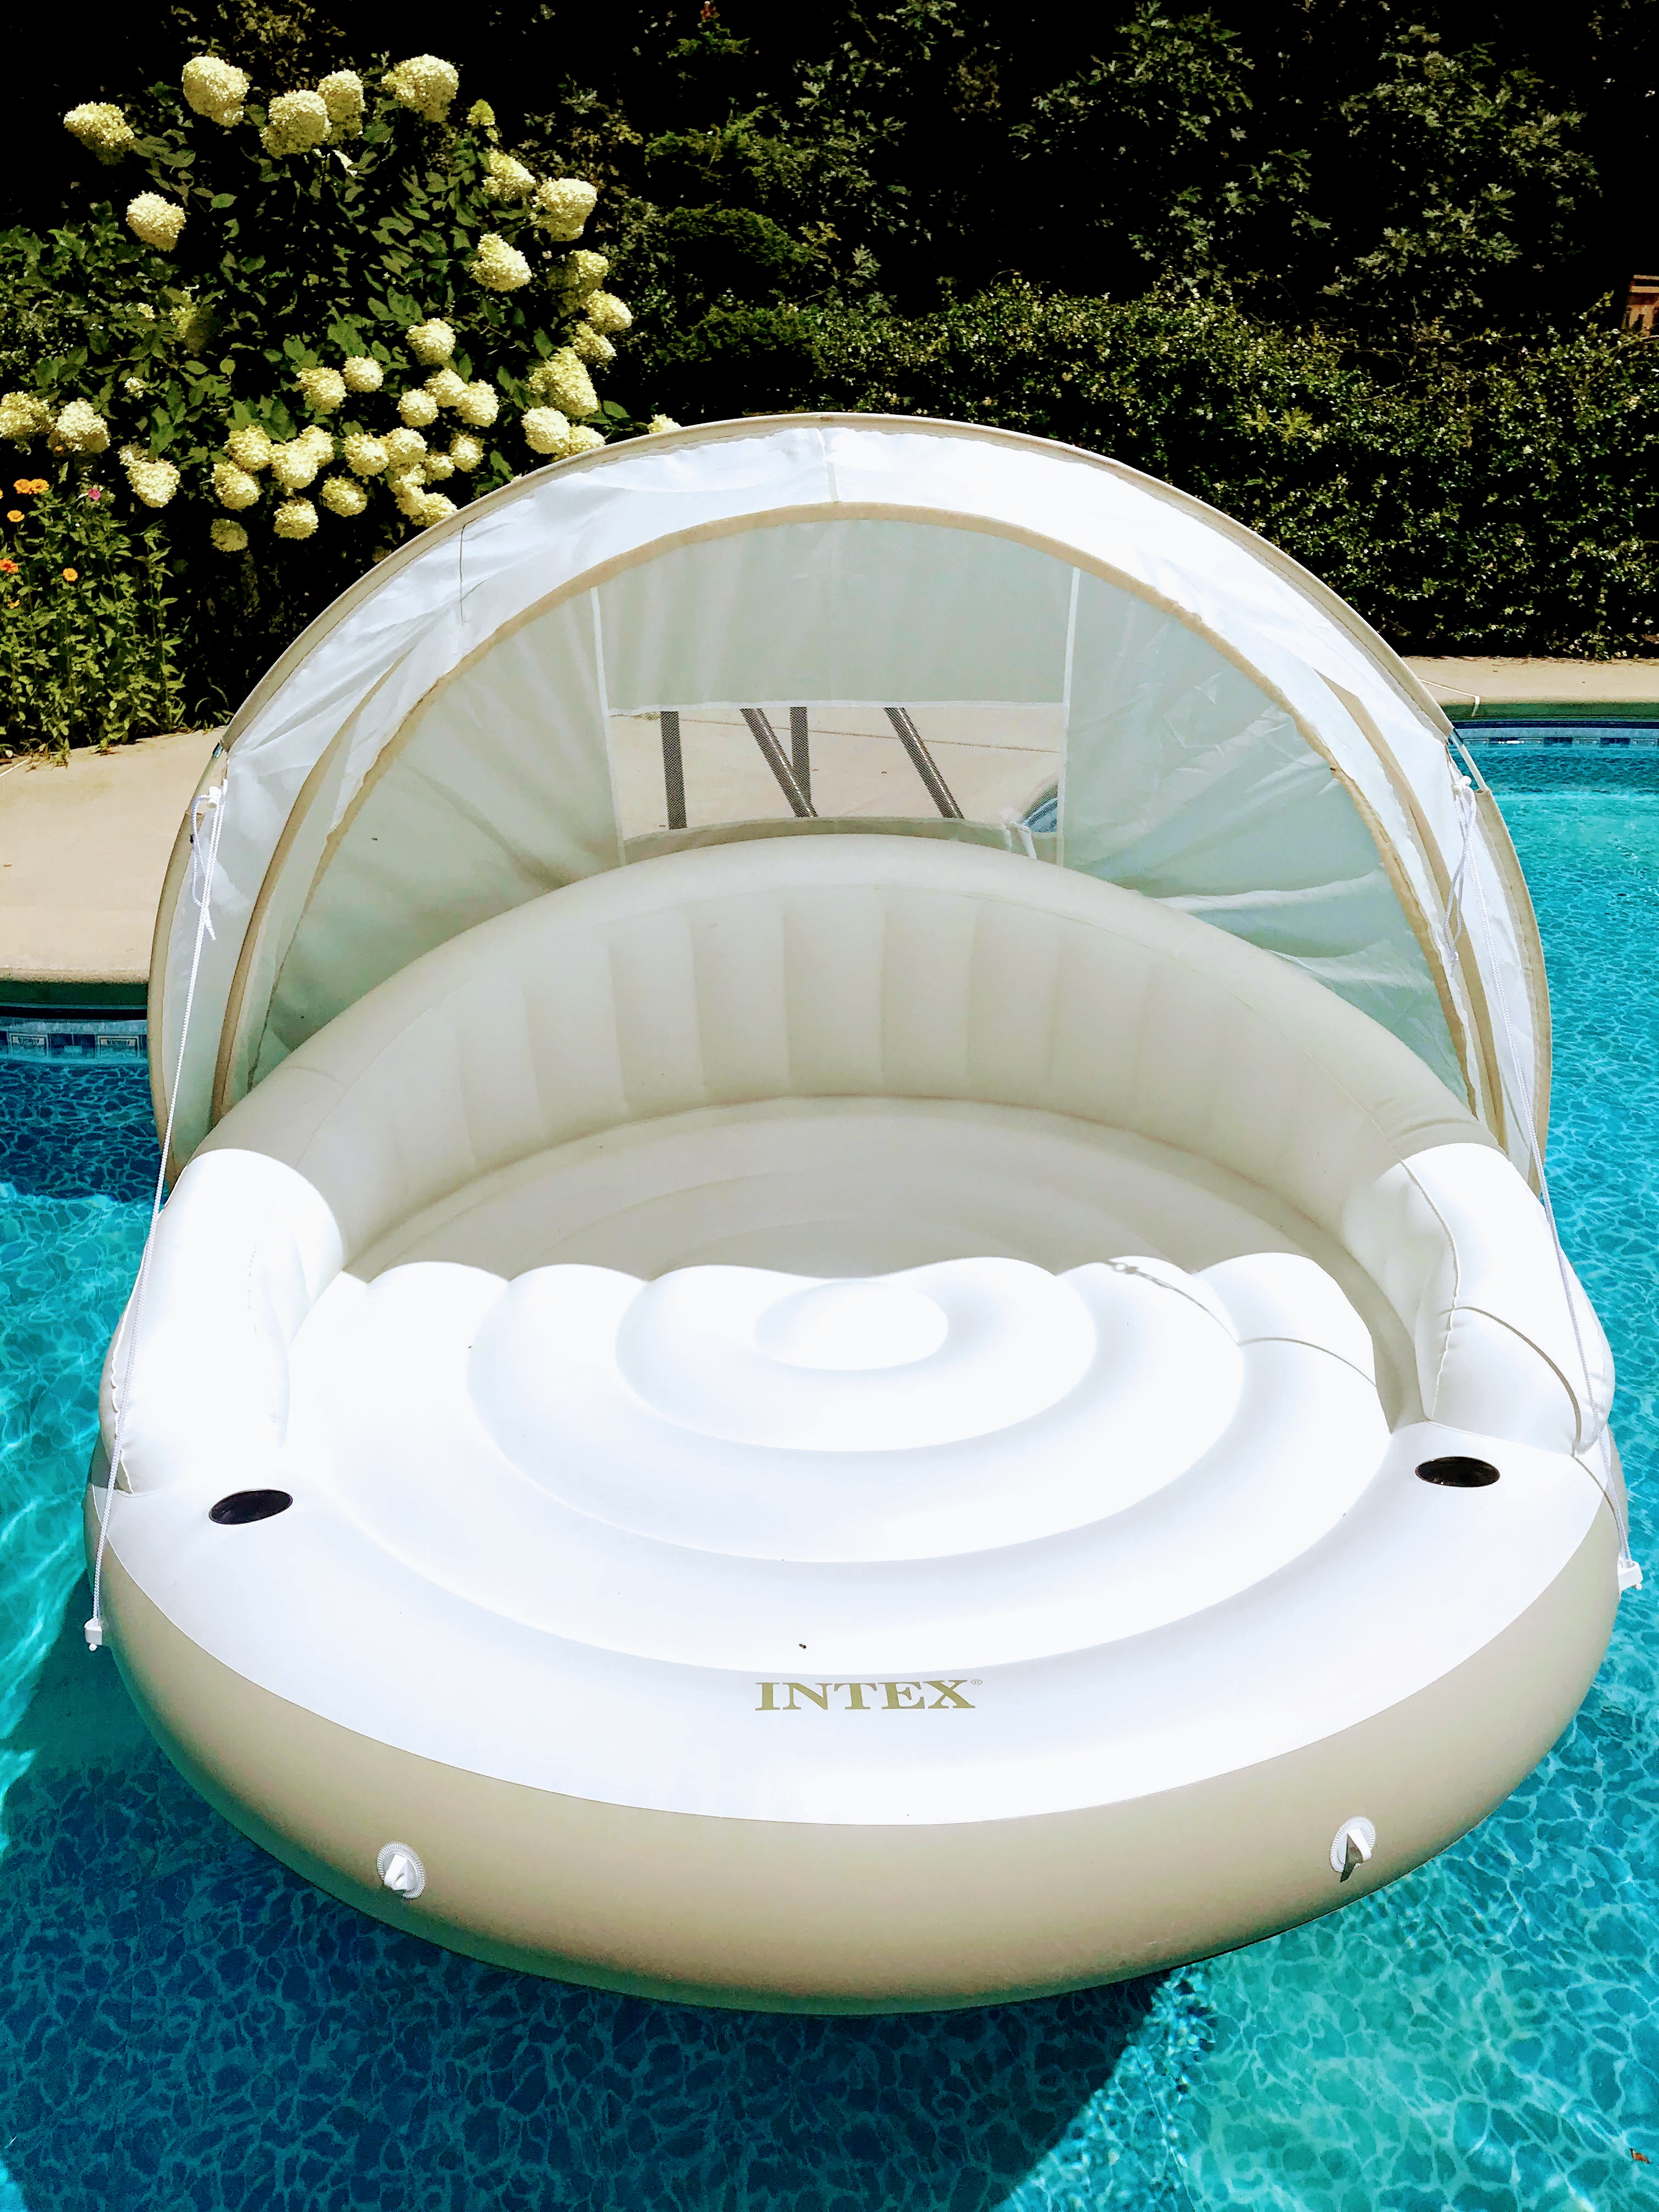 Pool Floats for Adults - Best Adult Pool Floats for Fun and Relaxation